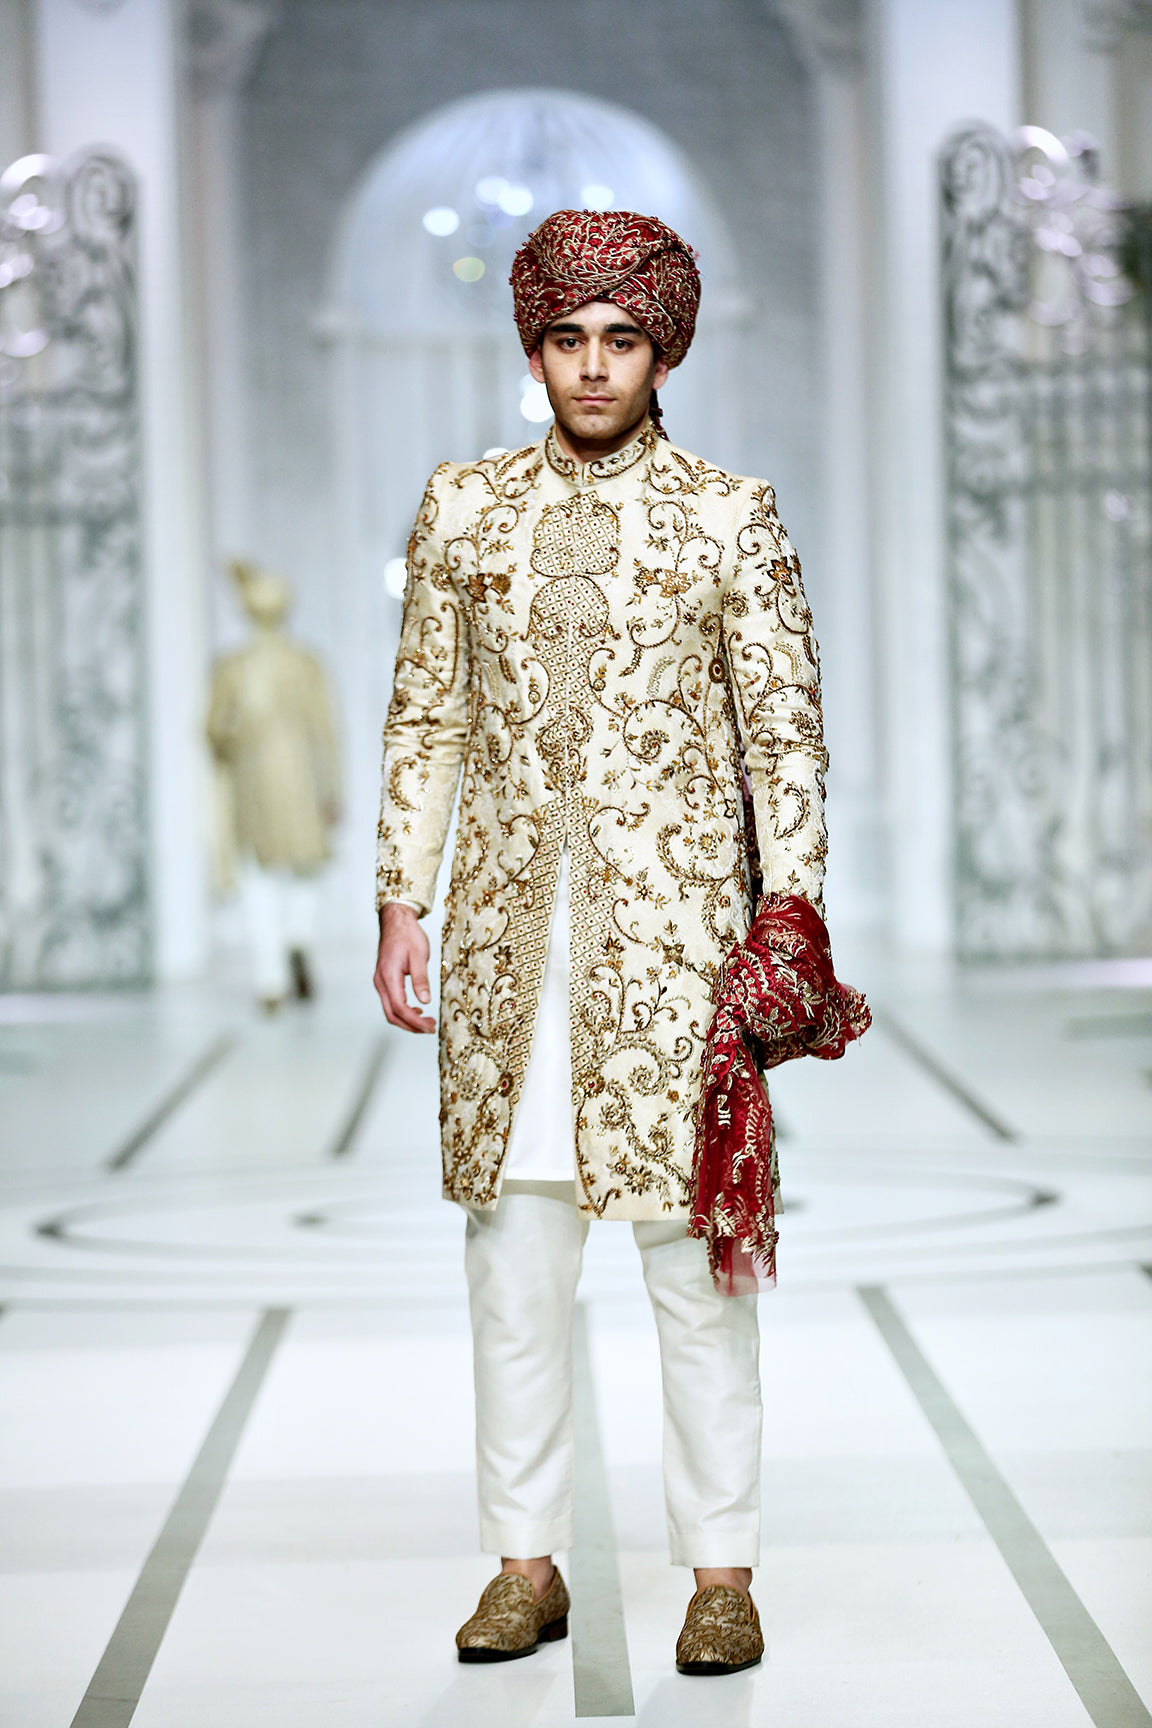 BCW 33 Virtuous Hand Worked decently crafted on Banarsi Fabric Paired With Turban with embelishment